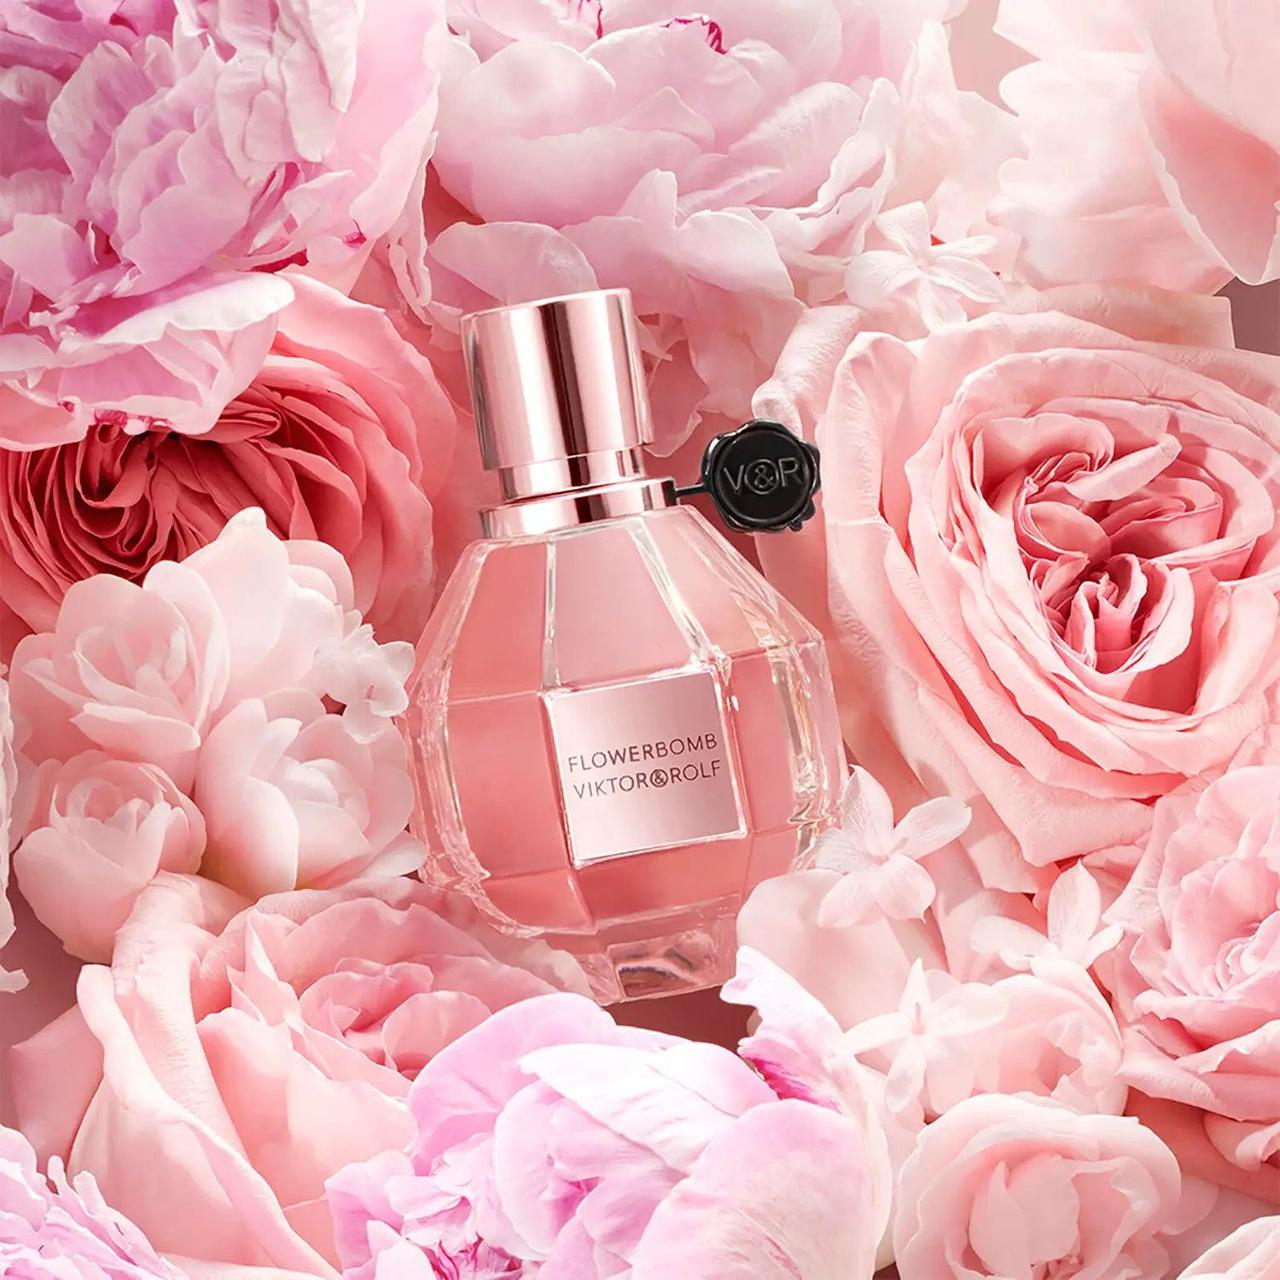 The Best Bridal Perfumes: Discover Our Top 10 Picks!